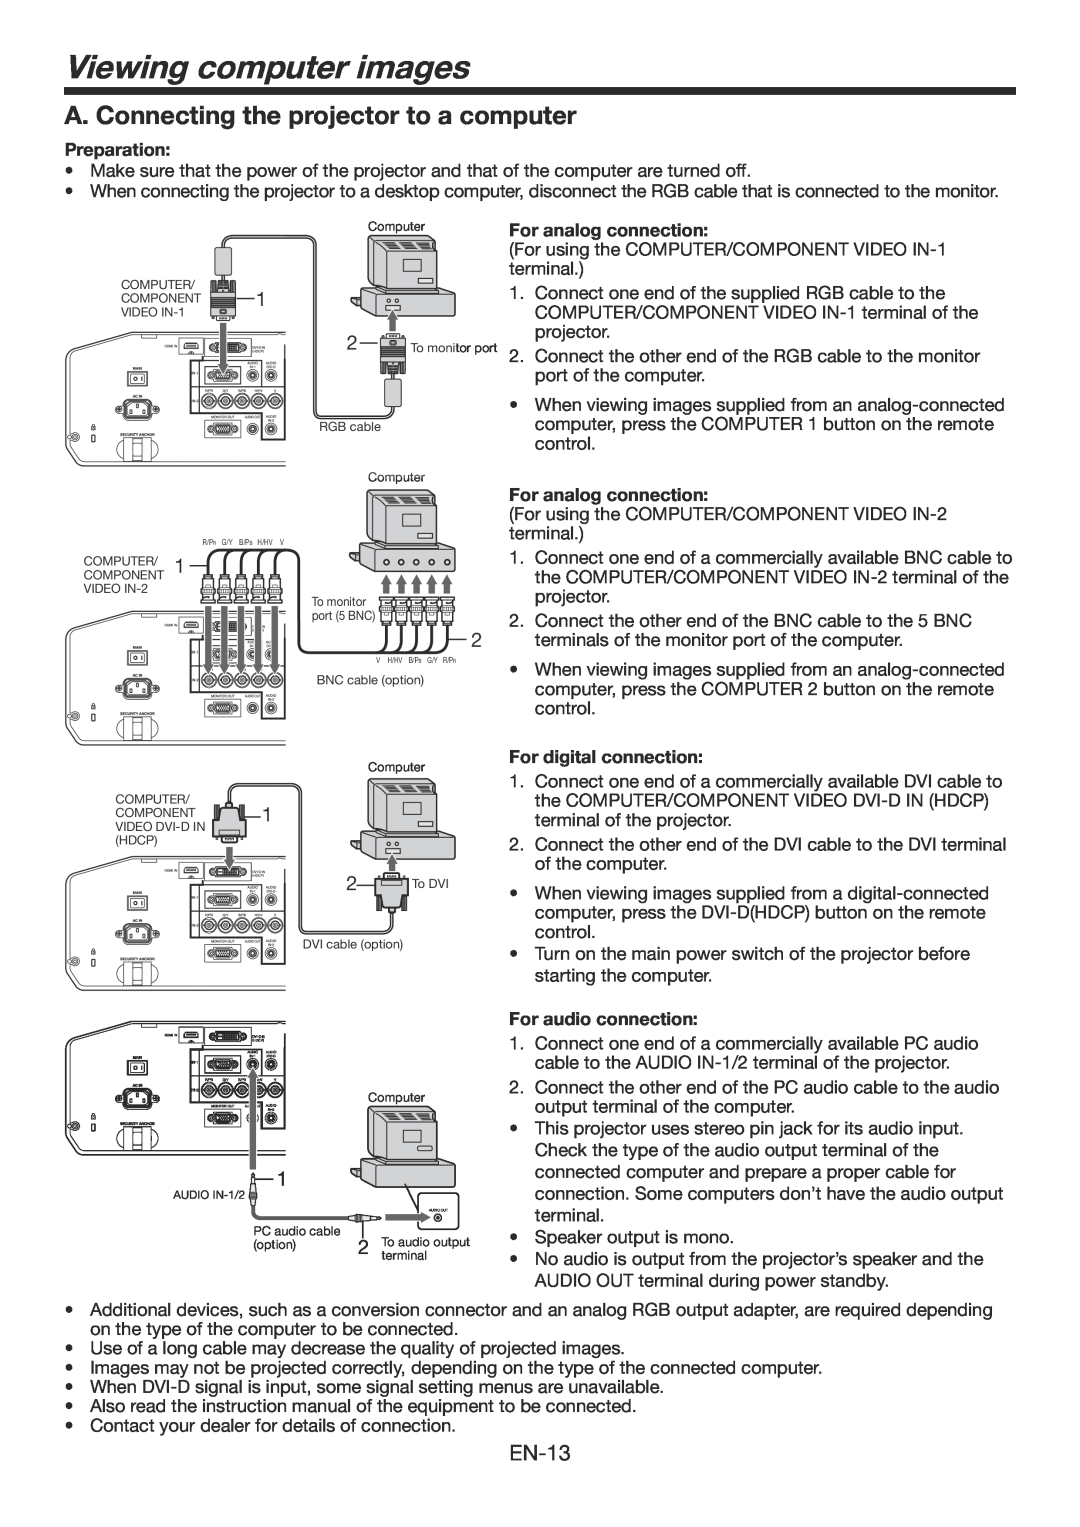 Mitsumi electronic WD3300U user manual Viewing computer images, A. Connecting the projector to a computer, Preparation 